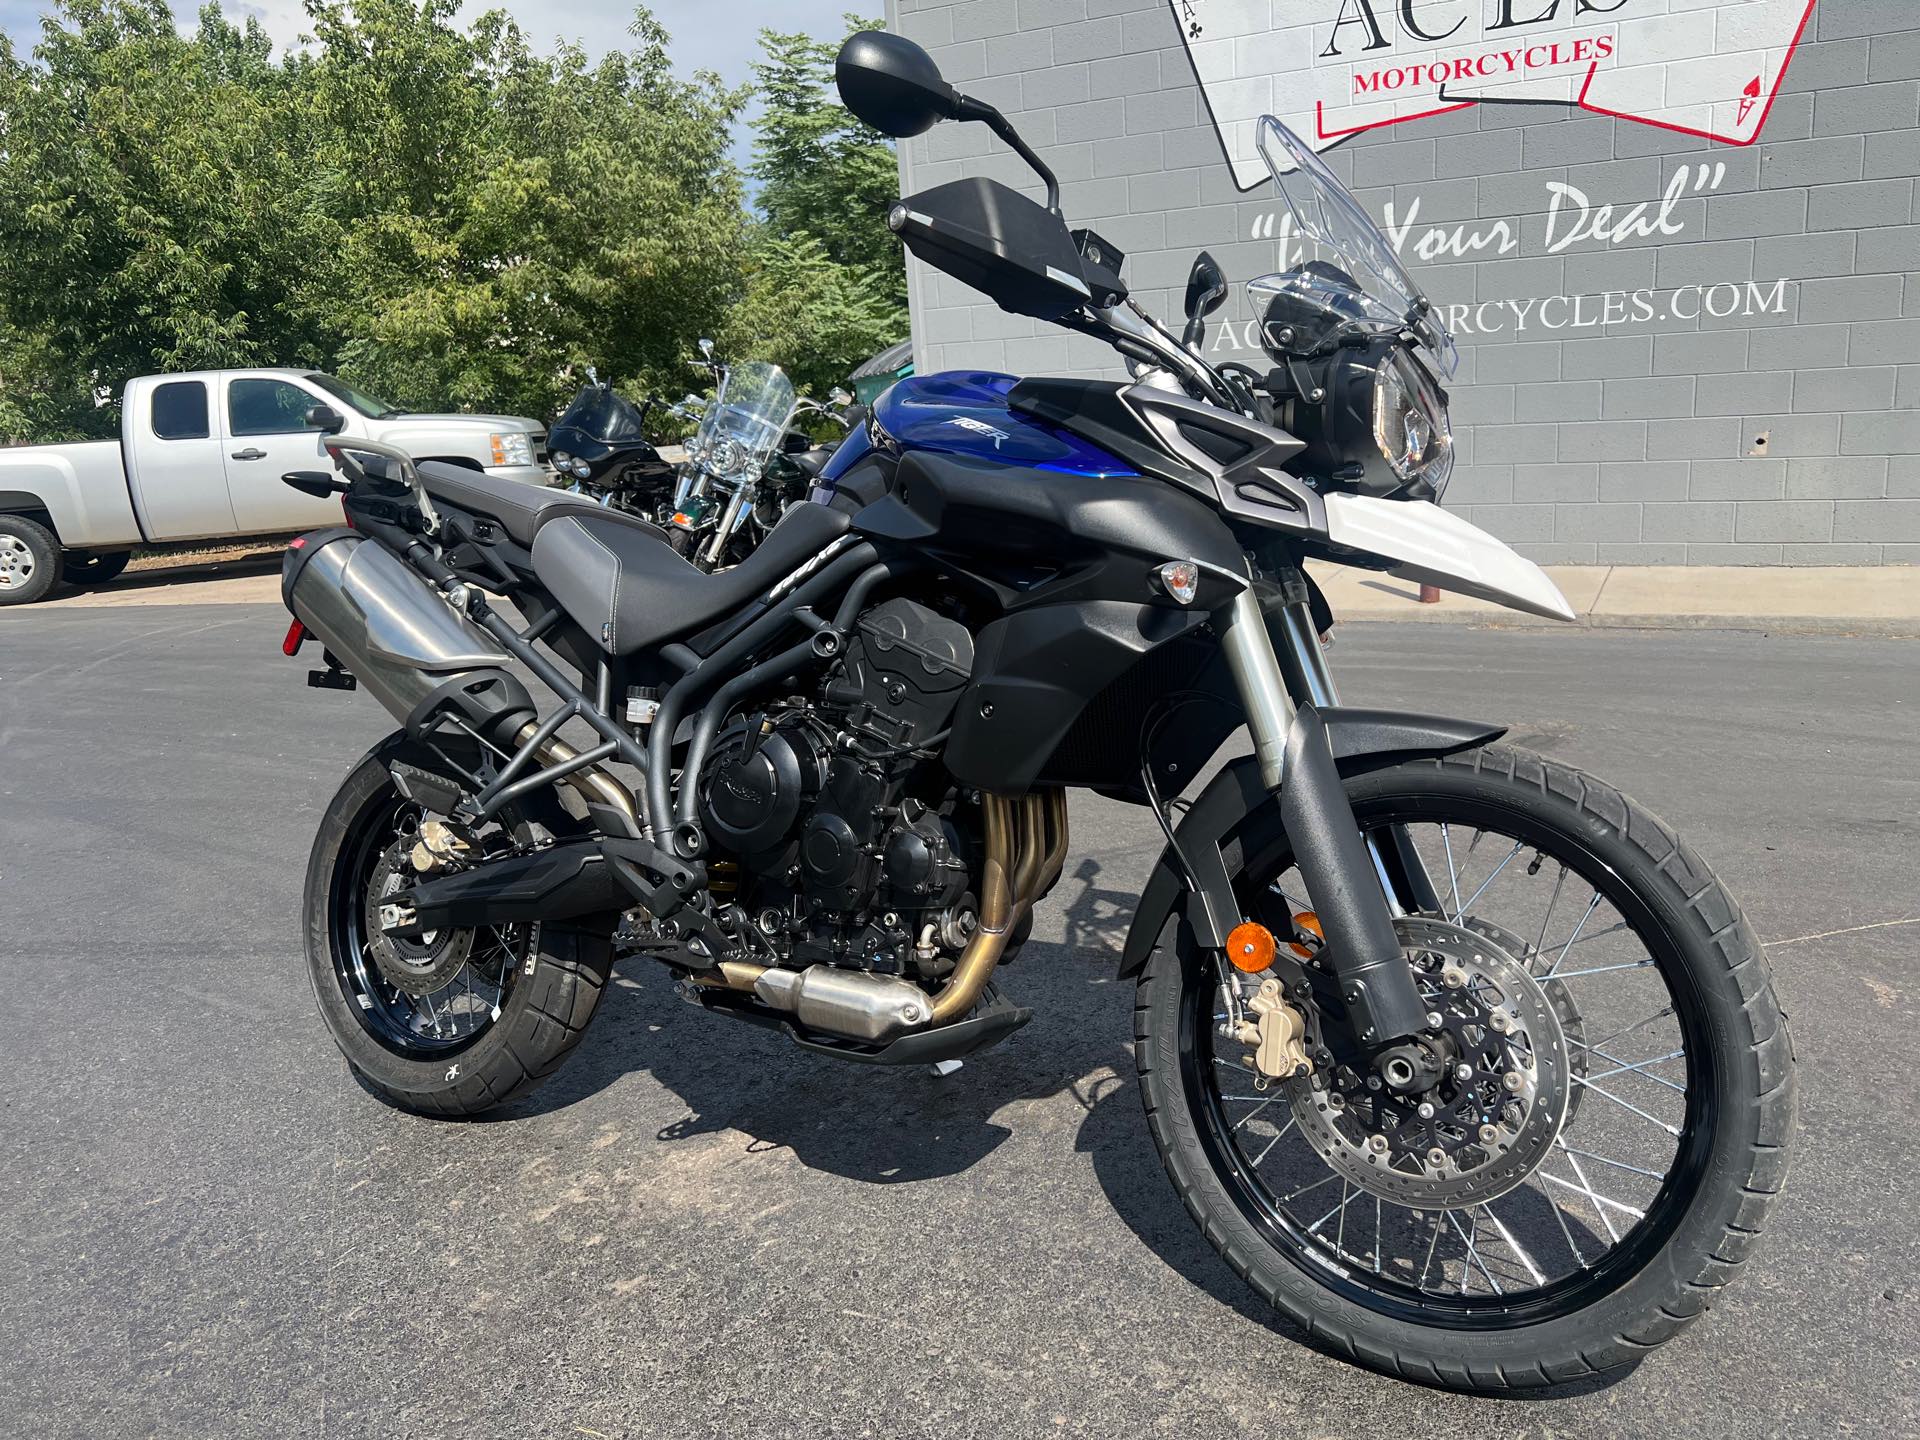 2014 TRIUMPH TIGER 800 XC at Aces Motorcycles - Fort Collins